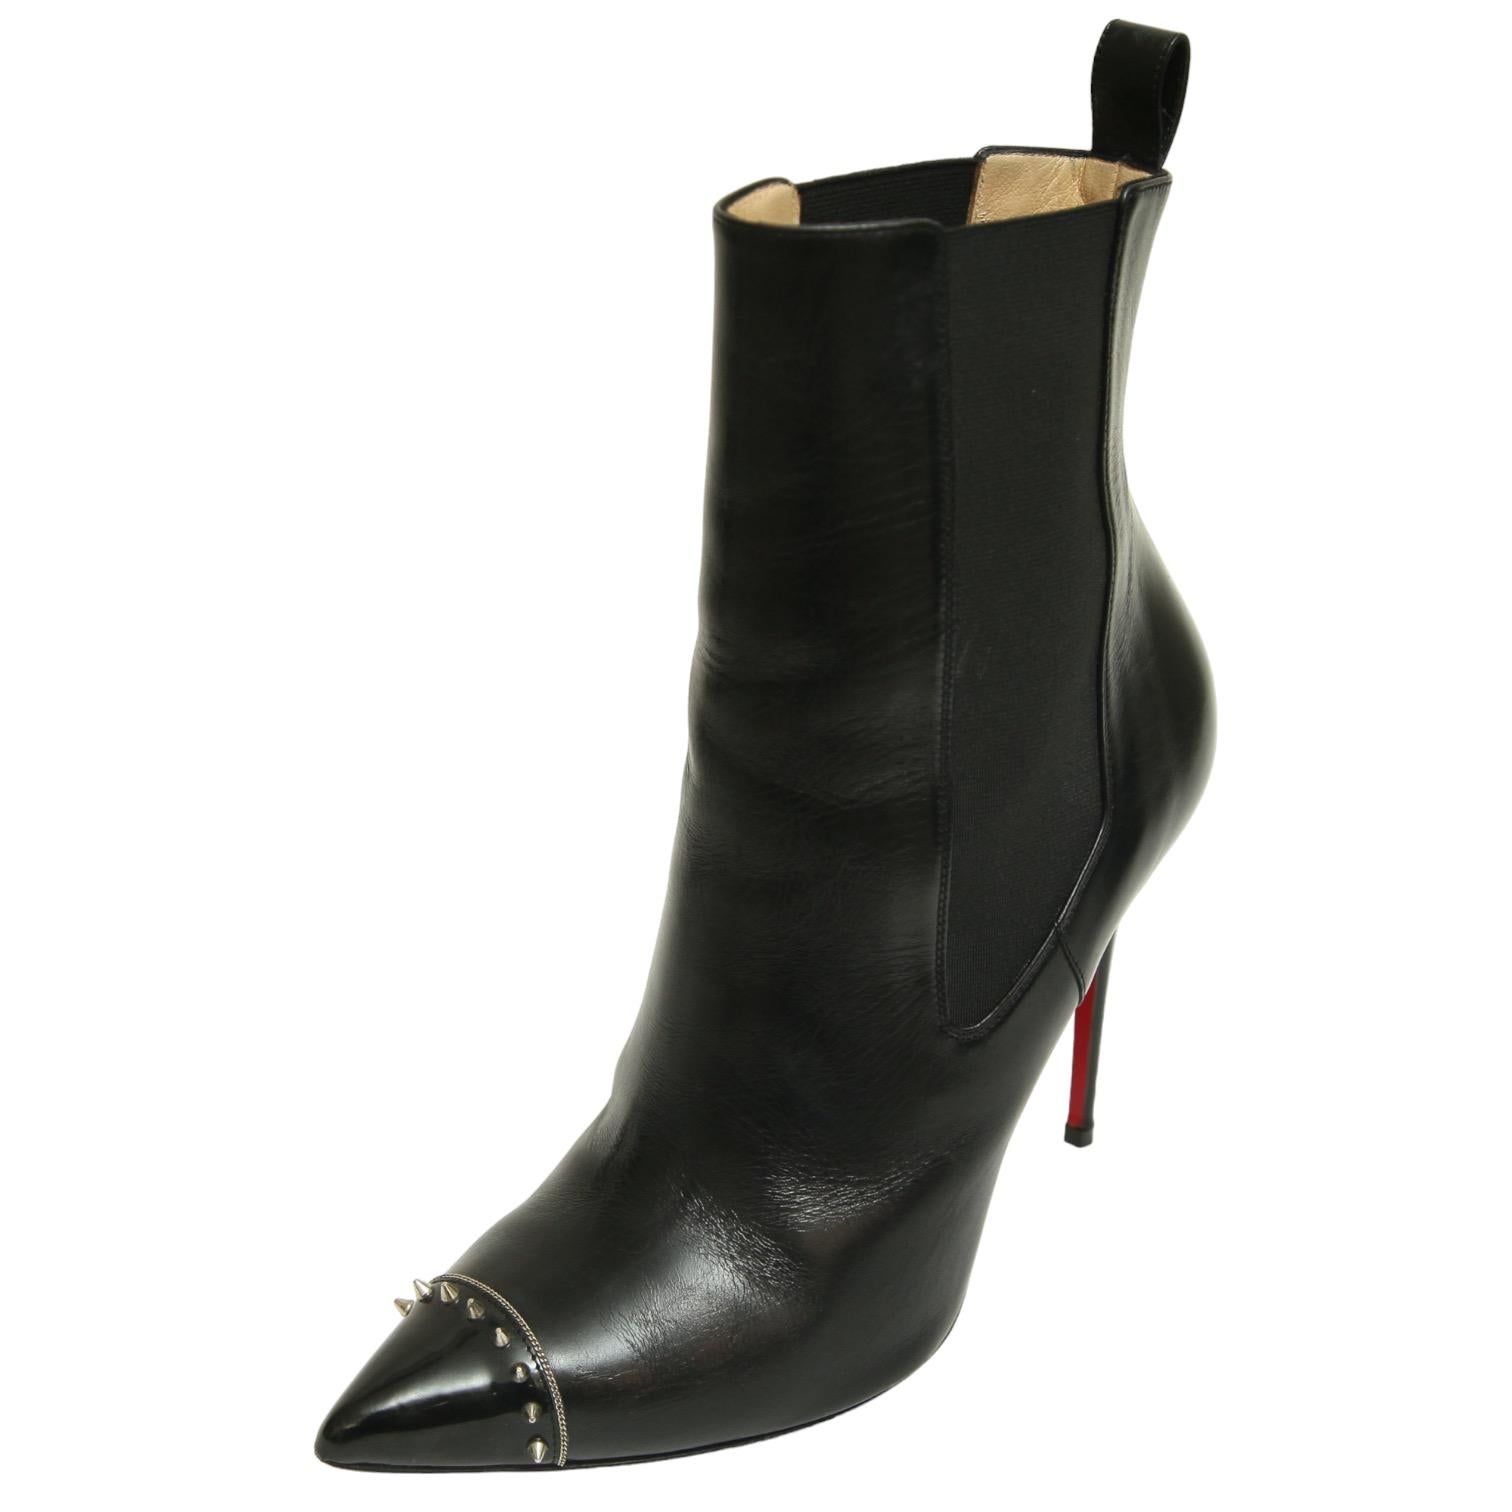 CHRISTIAN LOUBOUTIN Black Leather Bootie BANJO Ankle Boot Spiked Cap Toe 38.5 In Good Condition For Sale In Hollywood, FL